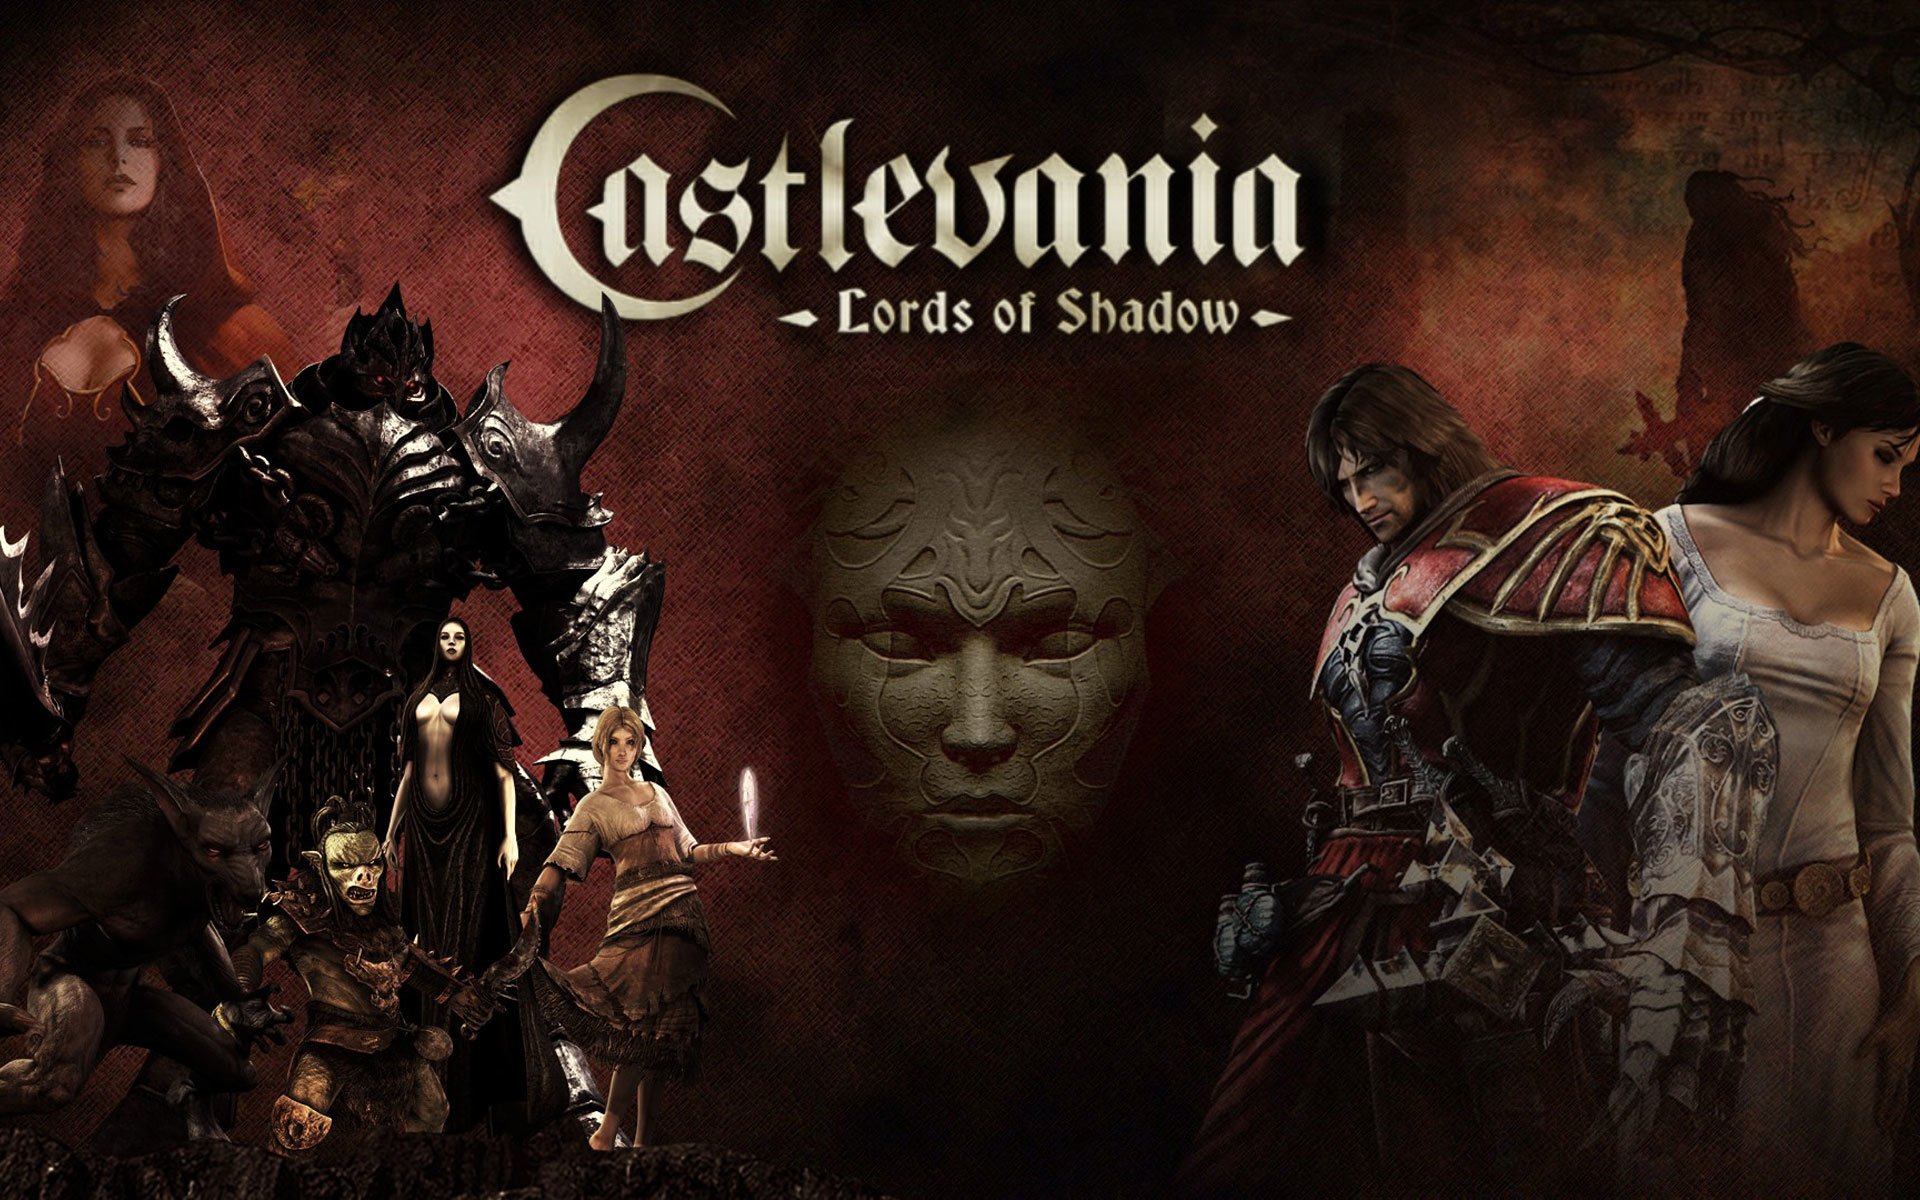 Castlevania: Lords of Shadow PC Demo Coming Tomorrow